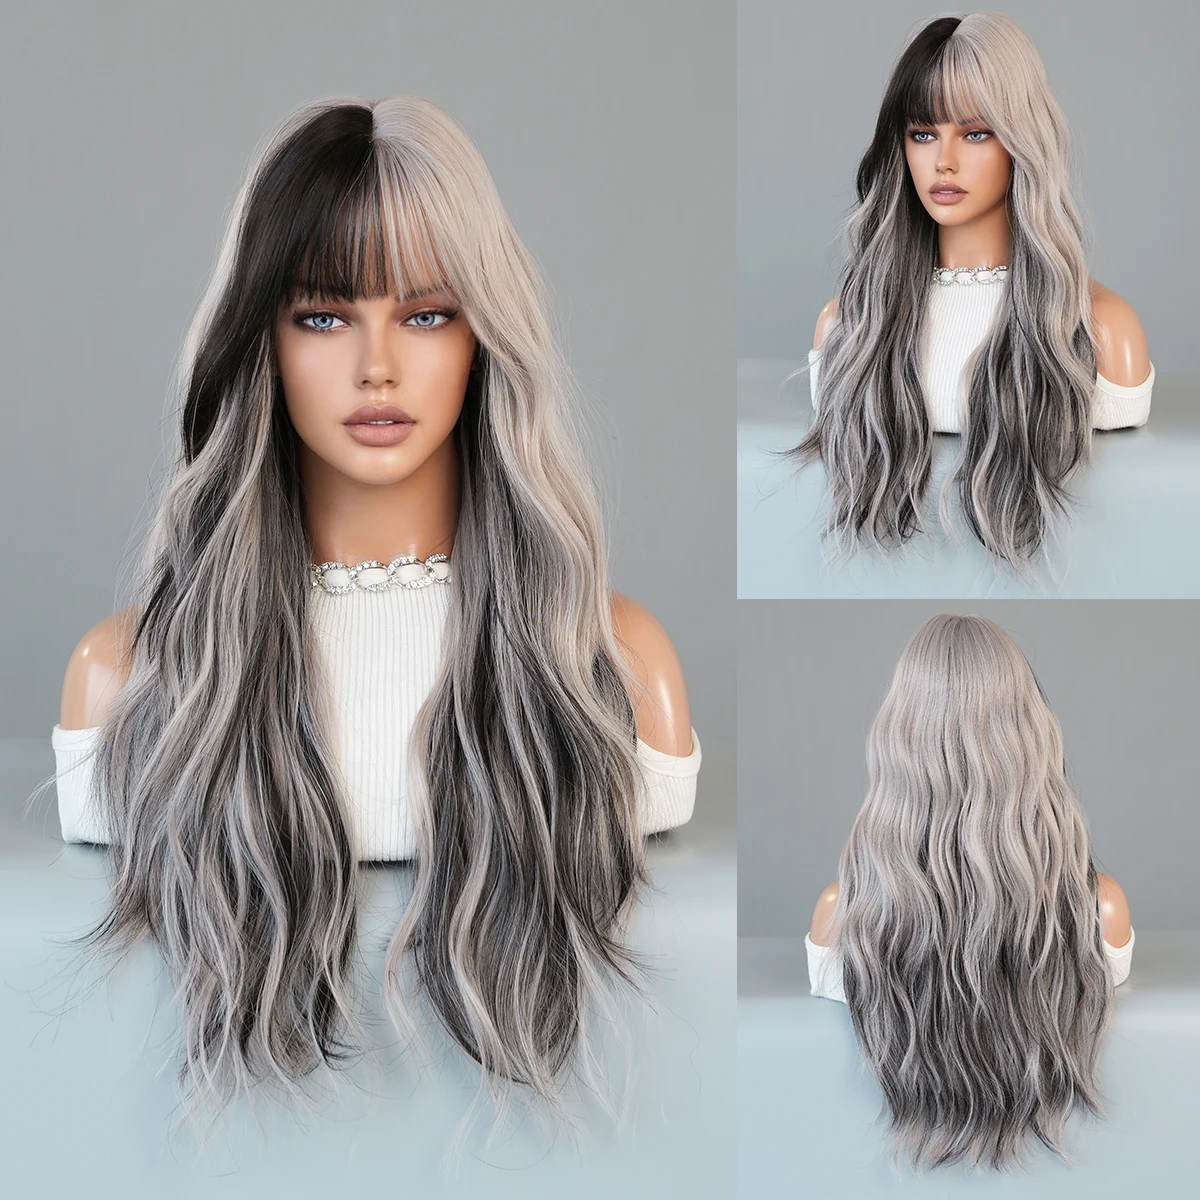 

PARK YUN Long Body Wavy Silver Ash Hair Wig with Bangs for Women Daily Party High Density Hair Ombre Wigs Heat Resistant Fiber